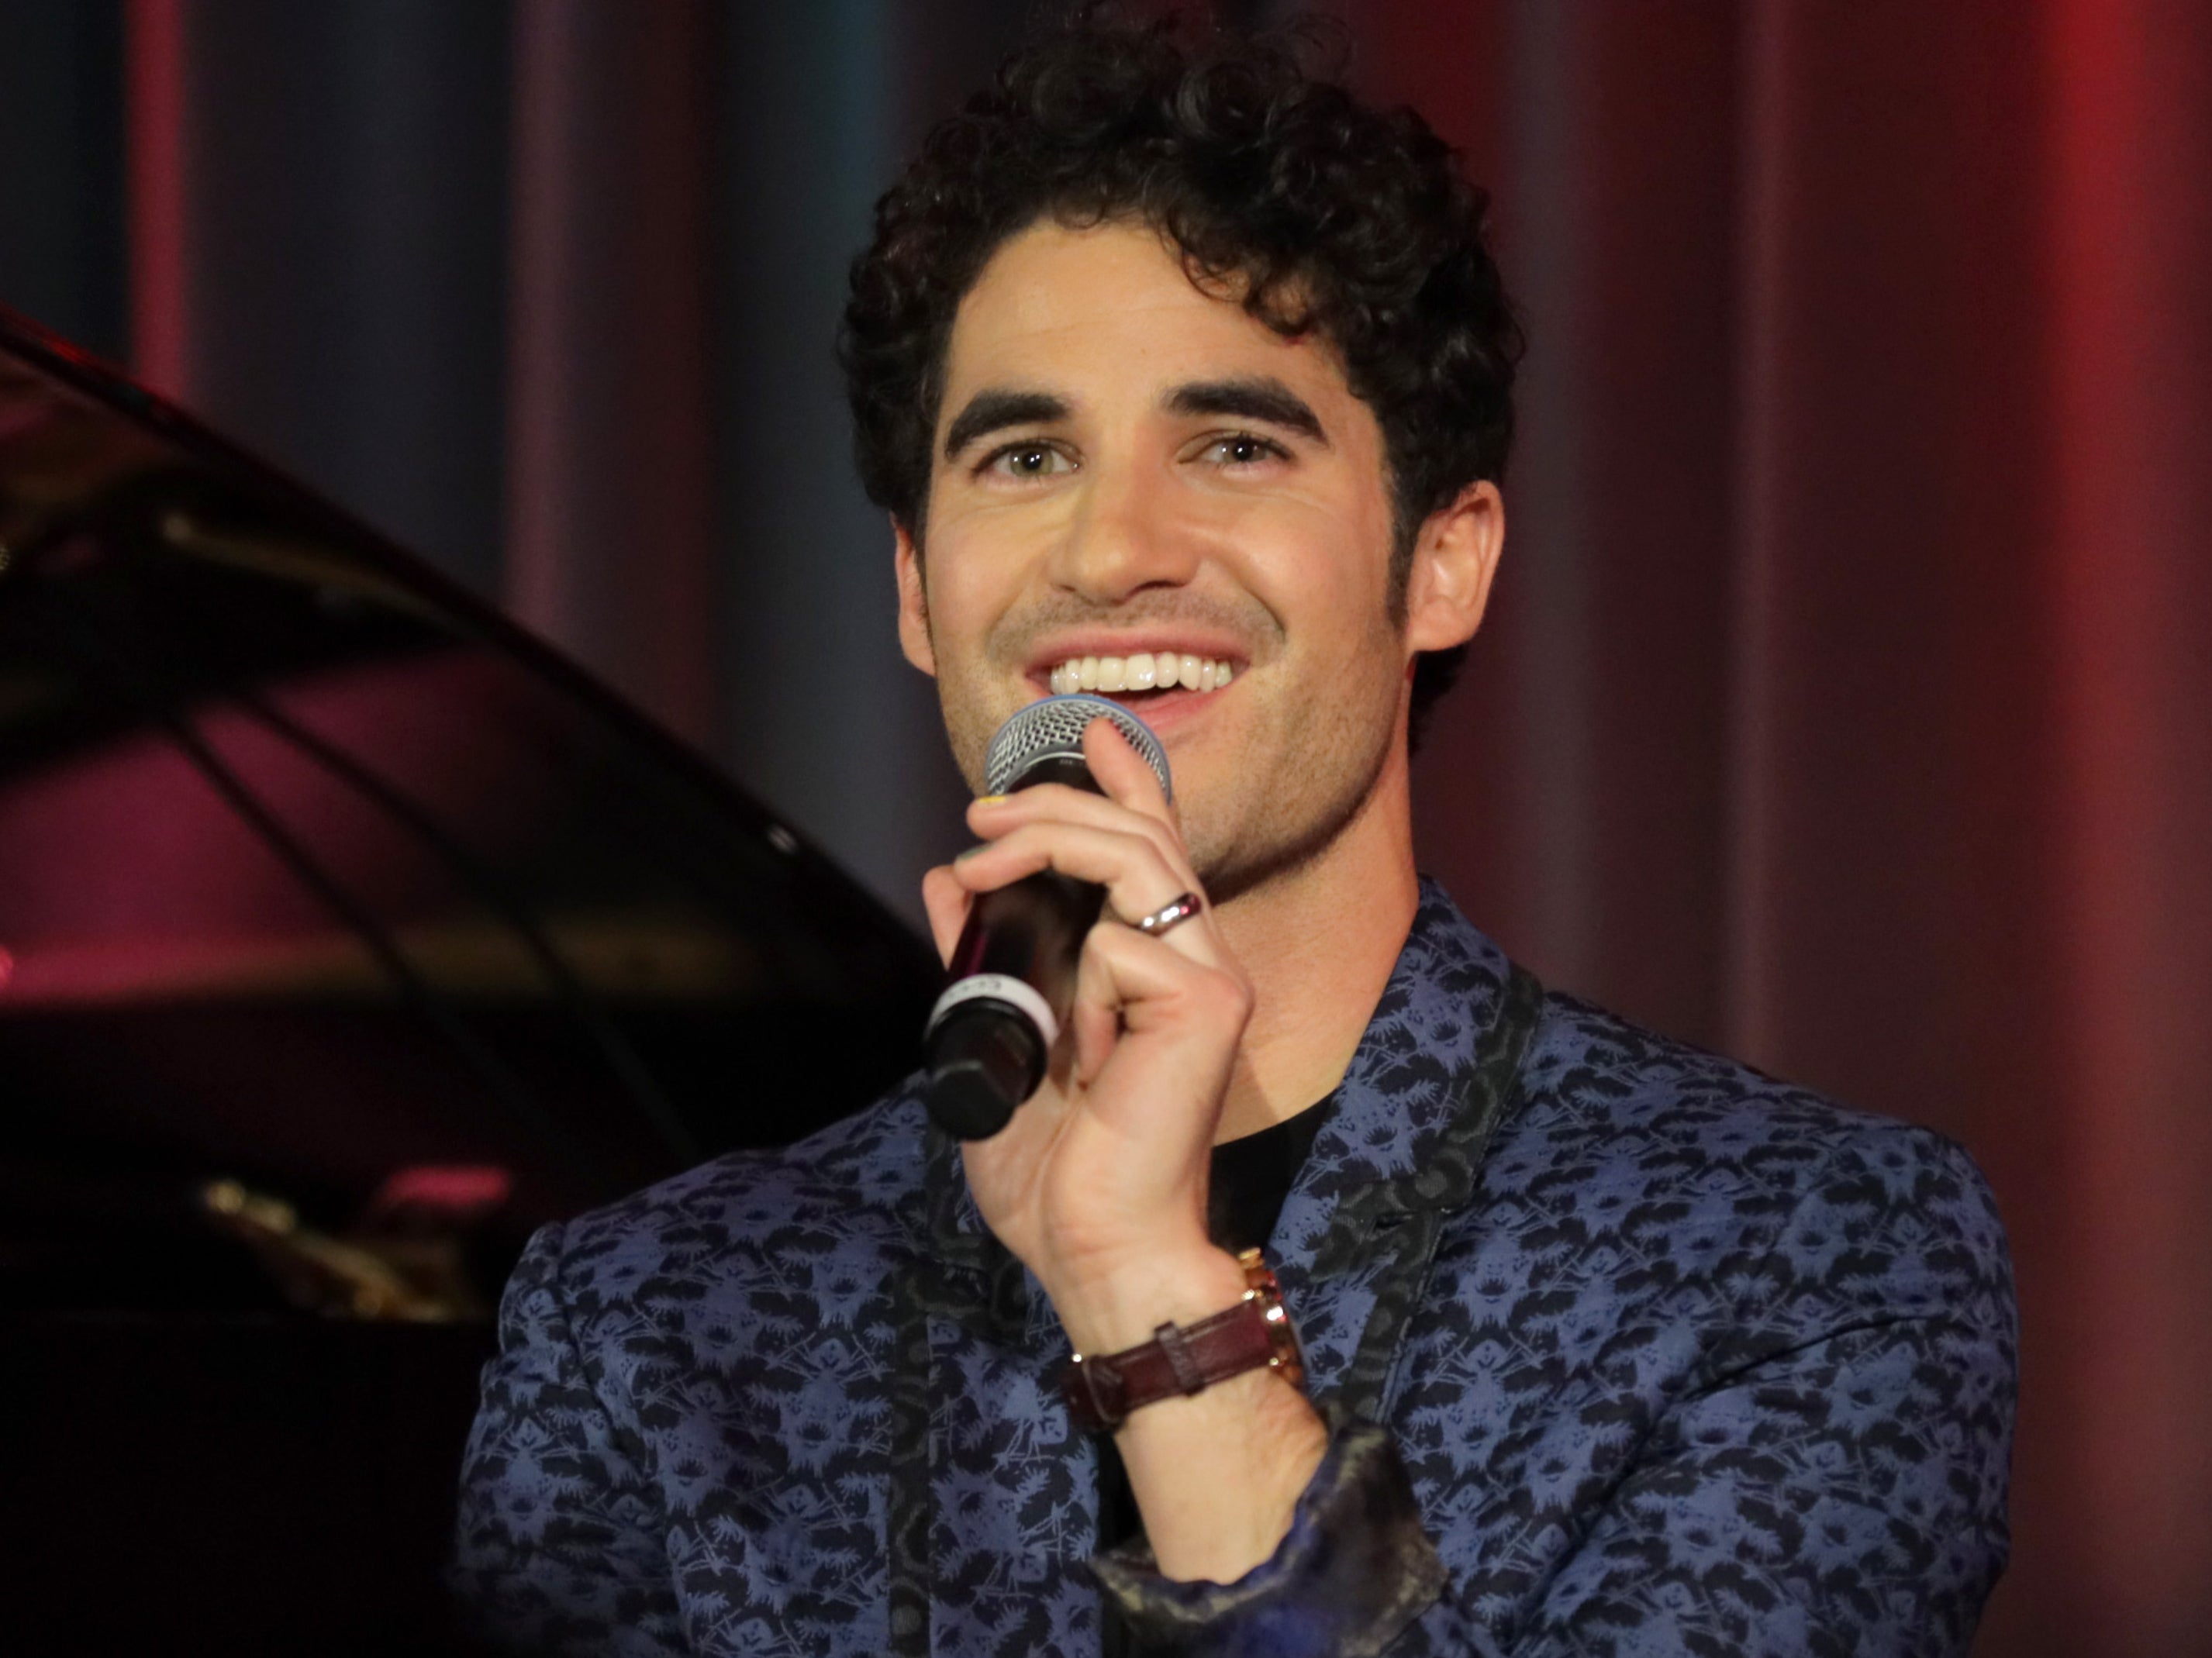 Darren Criss would be a “perfect fit with us” says Bass